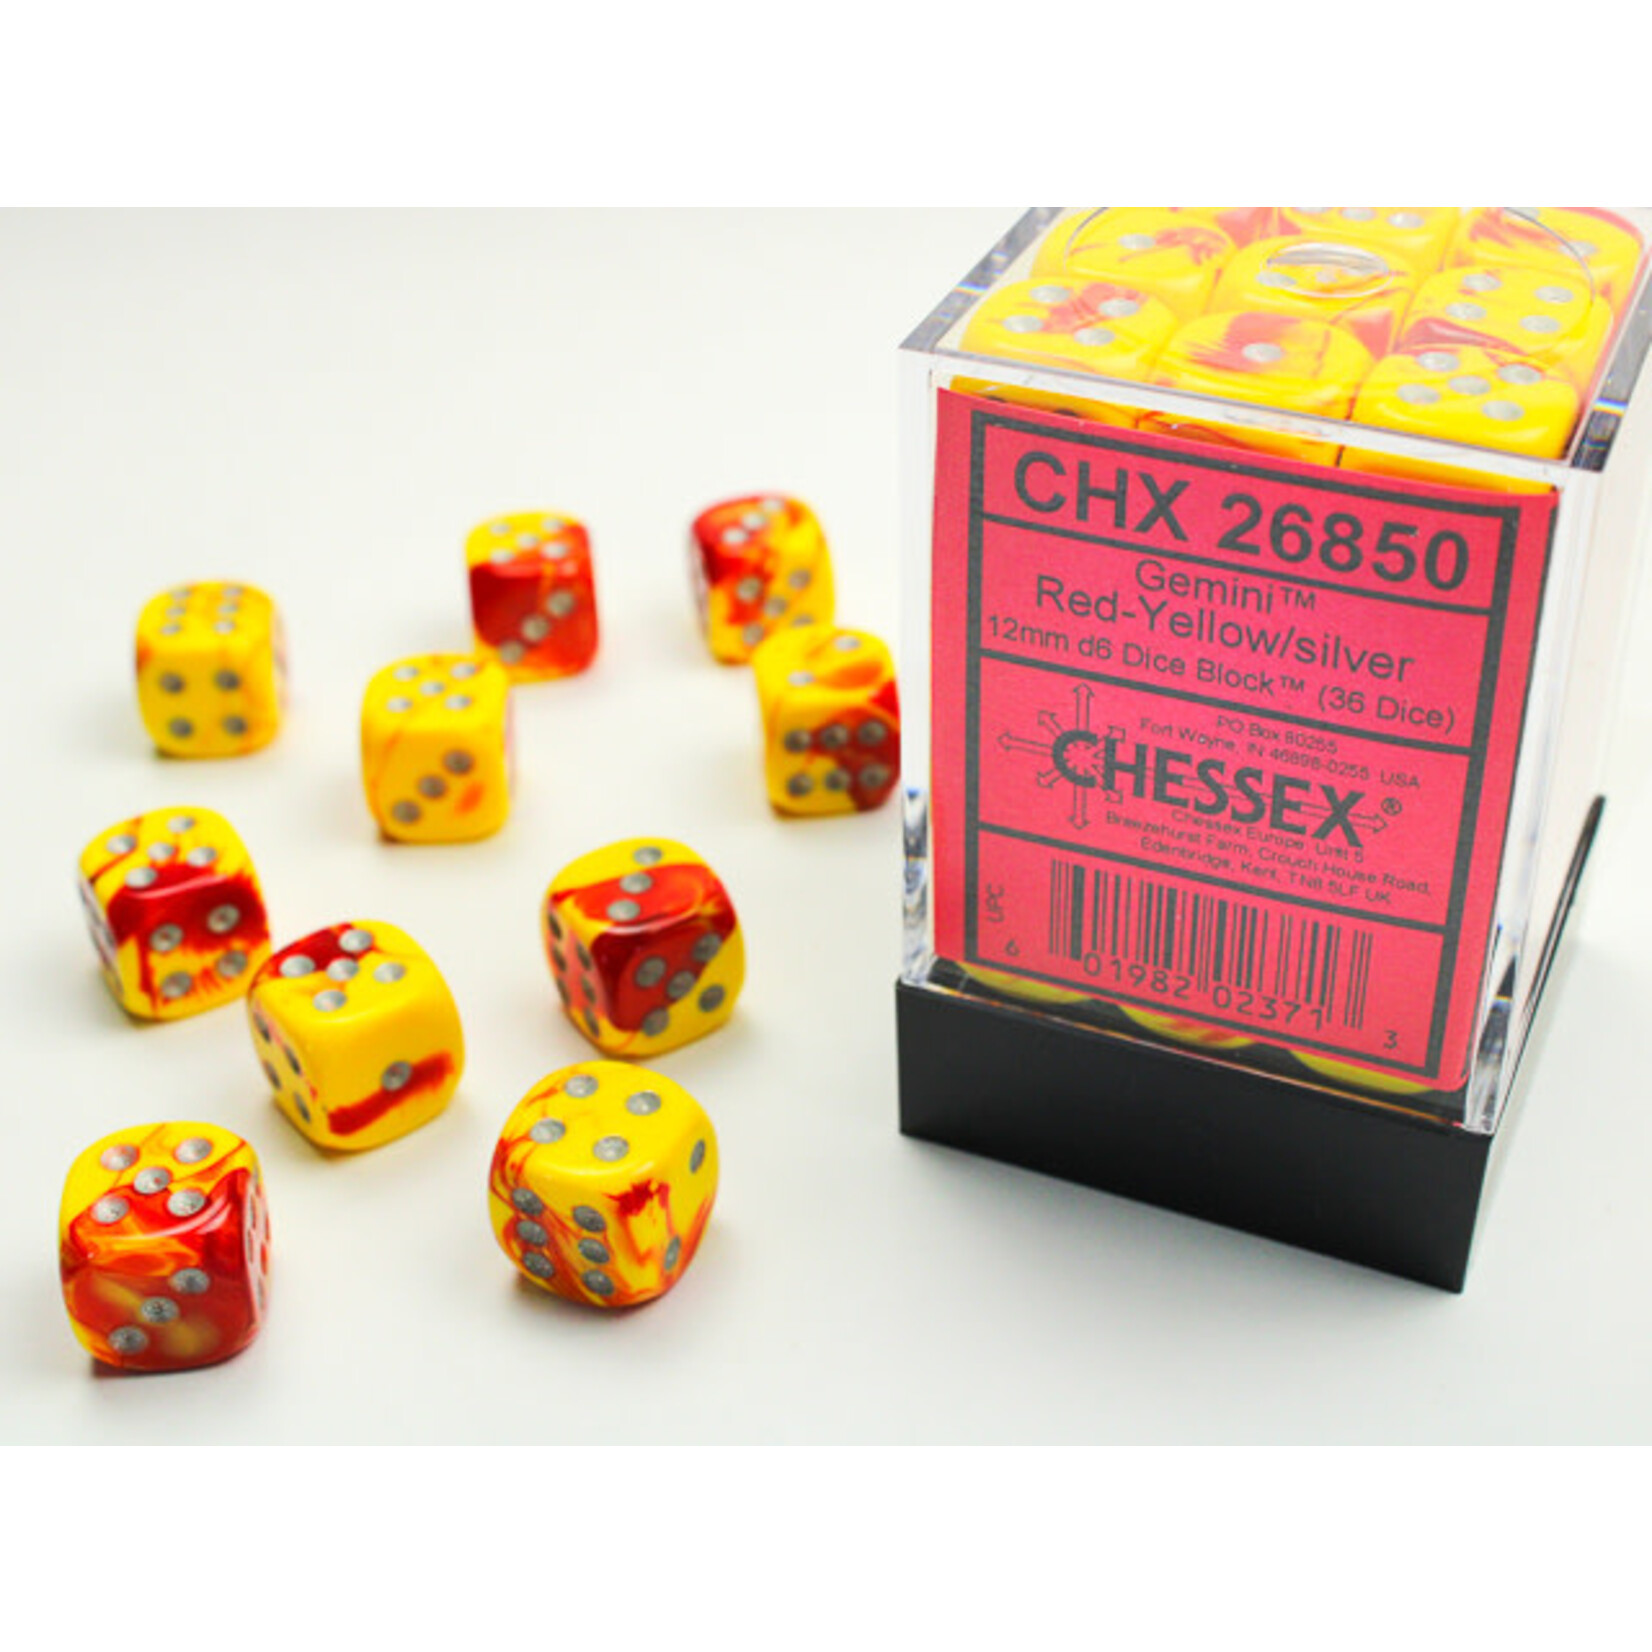 Chessex ***Dice 12mm 26850 36pc Gemini Red-Yellow/Silver